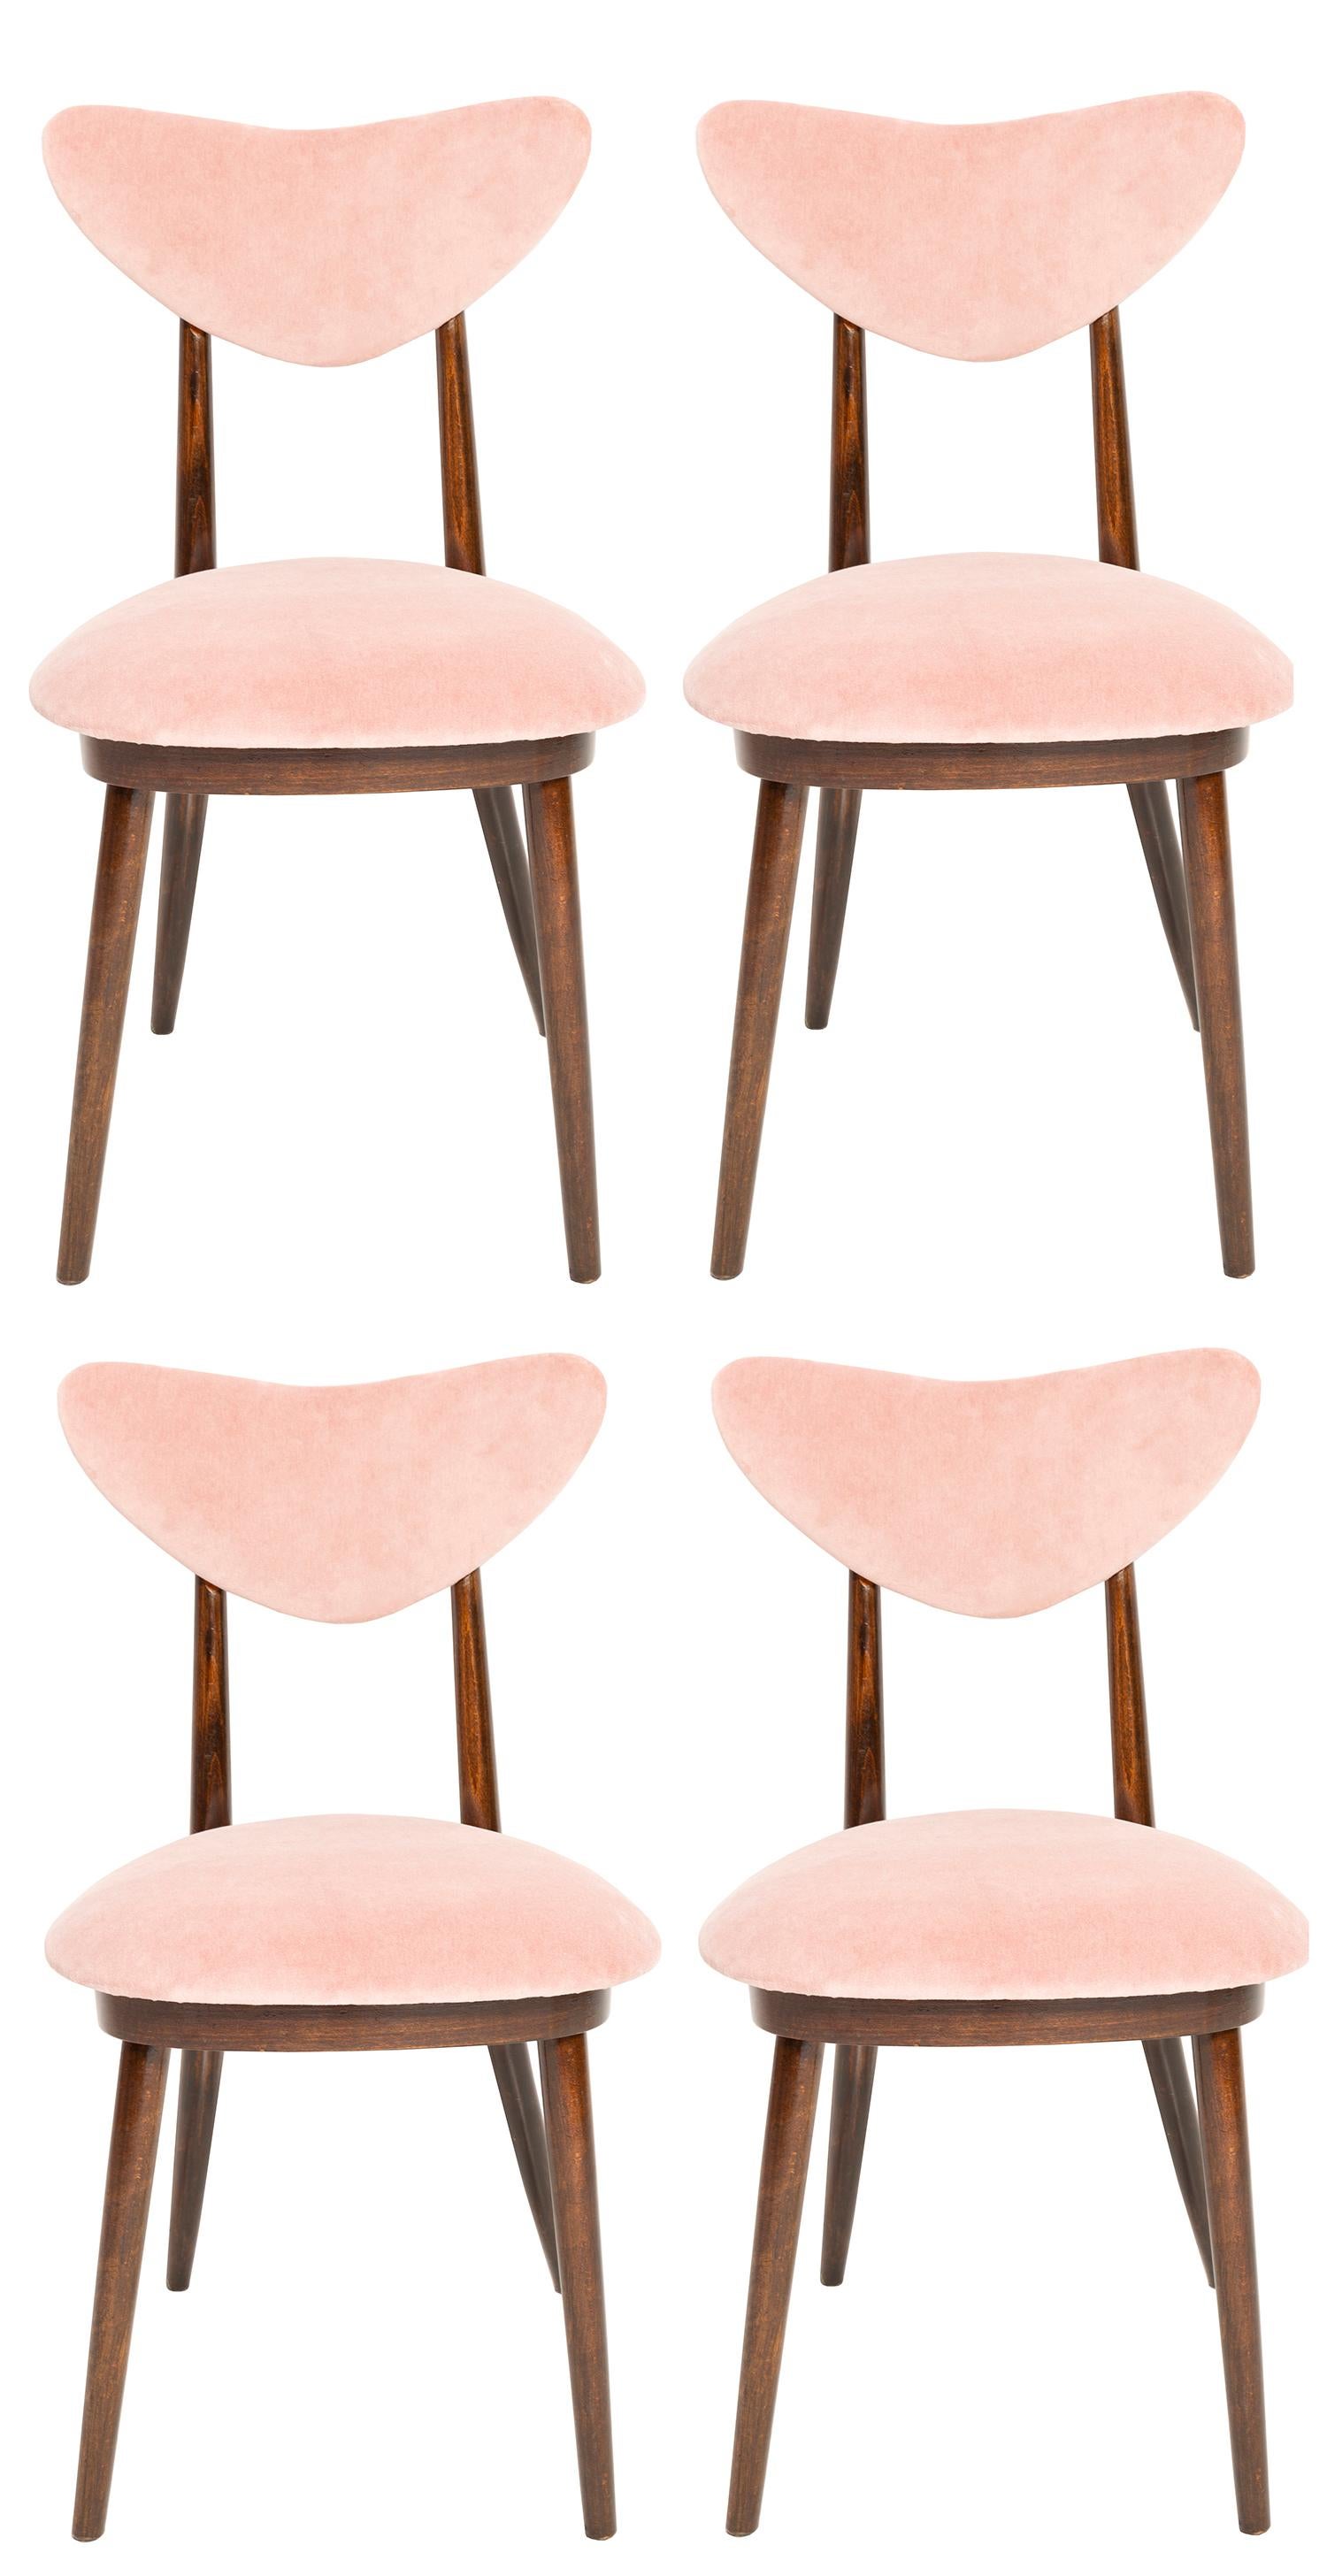 Hand-Crafted Set of Four Mid-Century Pink Cotton-Velvet Heart Chairs, Europe, 1960s For Sale